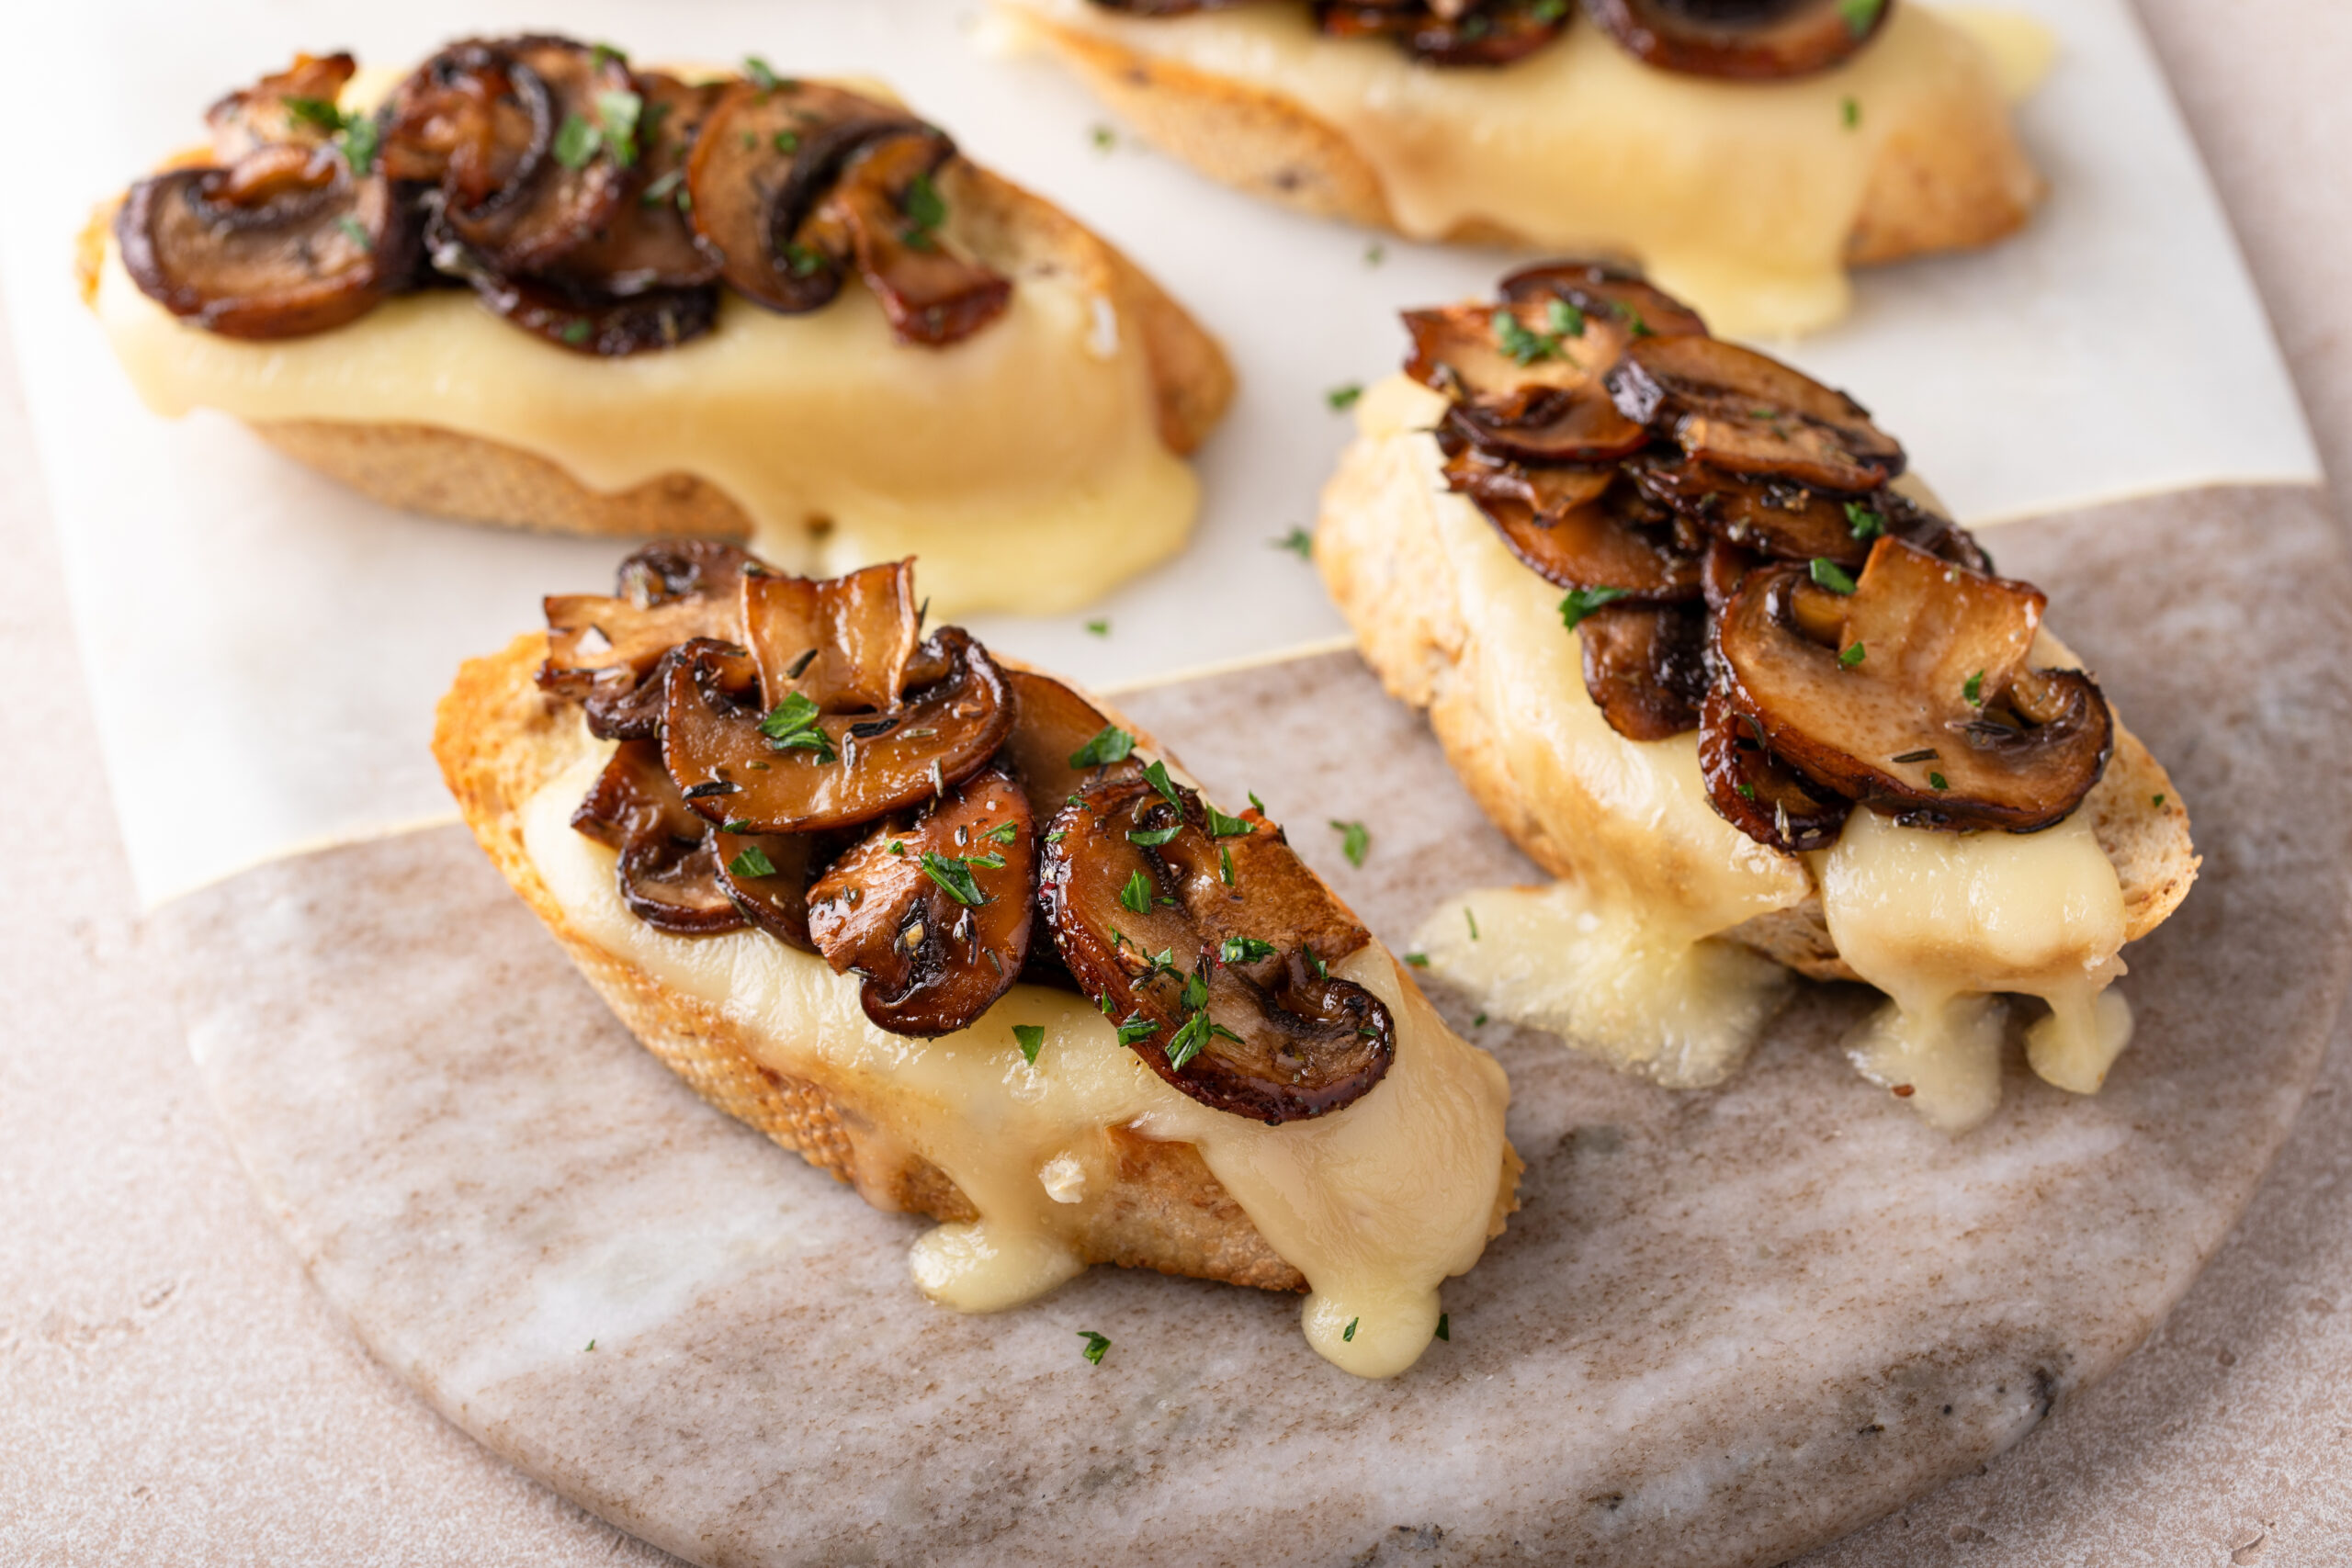 These mushroom & brie crostinis make for the most perfect, delicious and savory appetizer! Click HERE for the recipe!